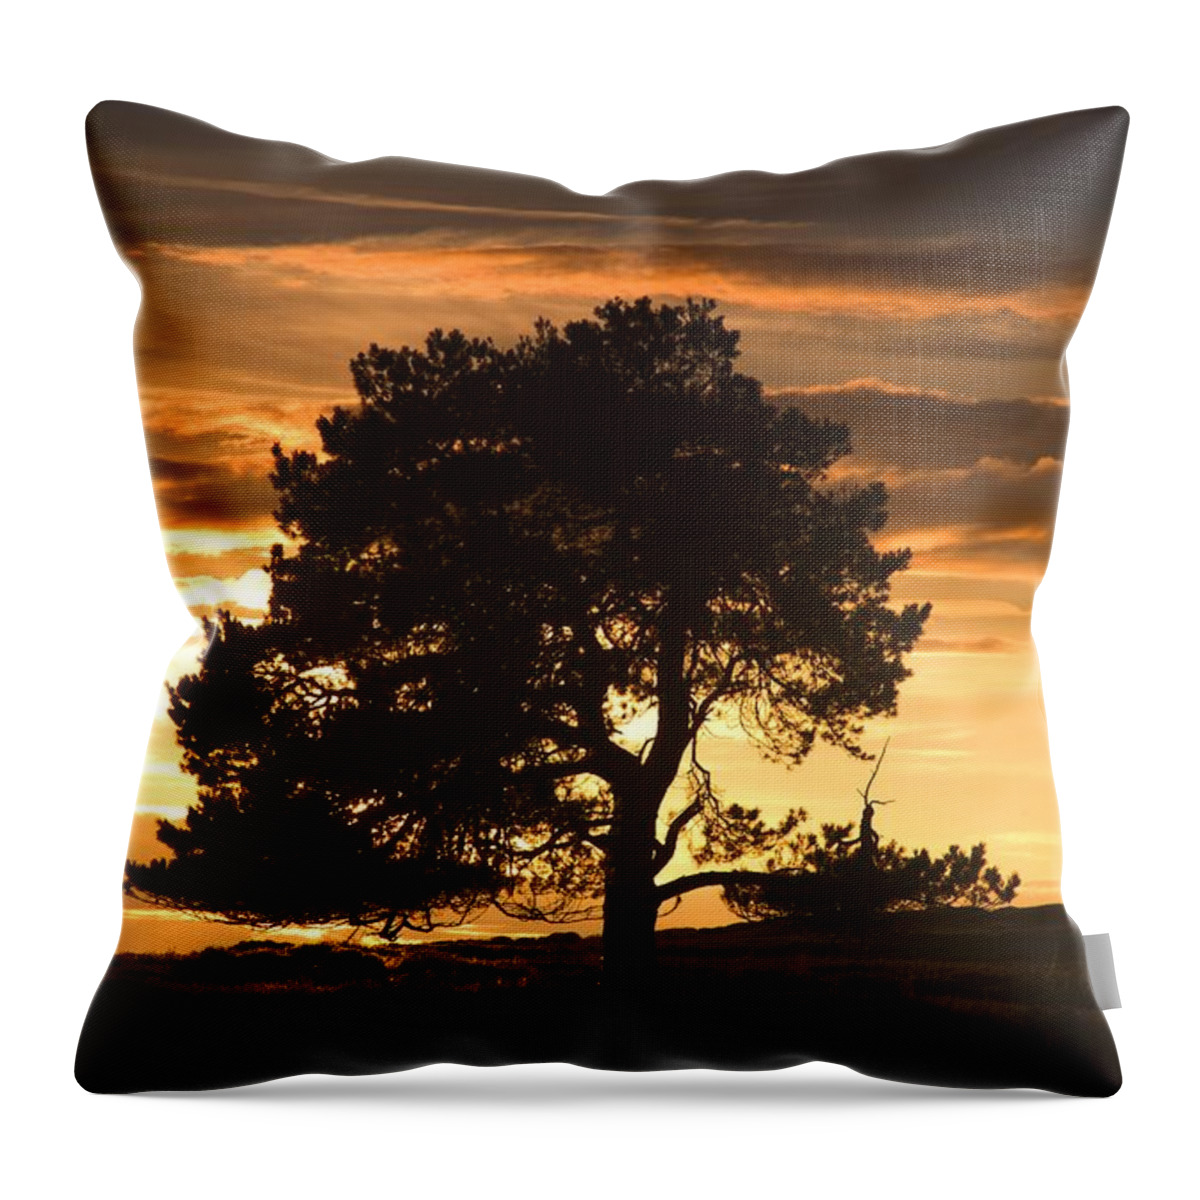 England Throw Pillow featuring the photograph Tree At Sunset, North Yorkshire, England by John Short